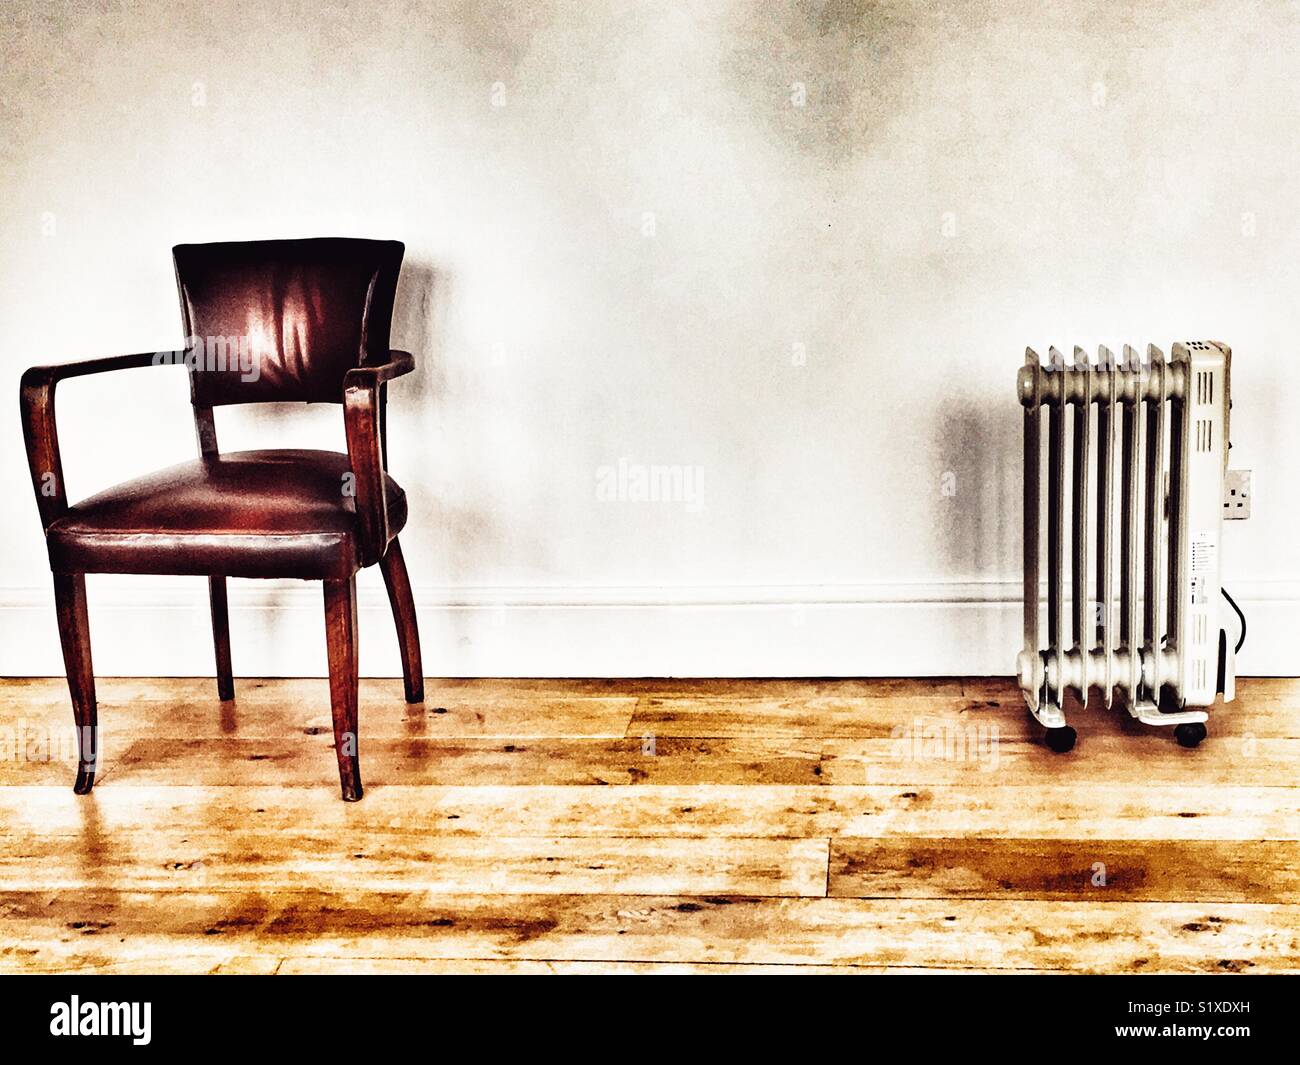 Leather Chair Electric Heater Stock Photo 310982969 Alamy